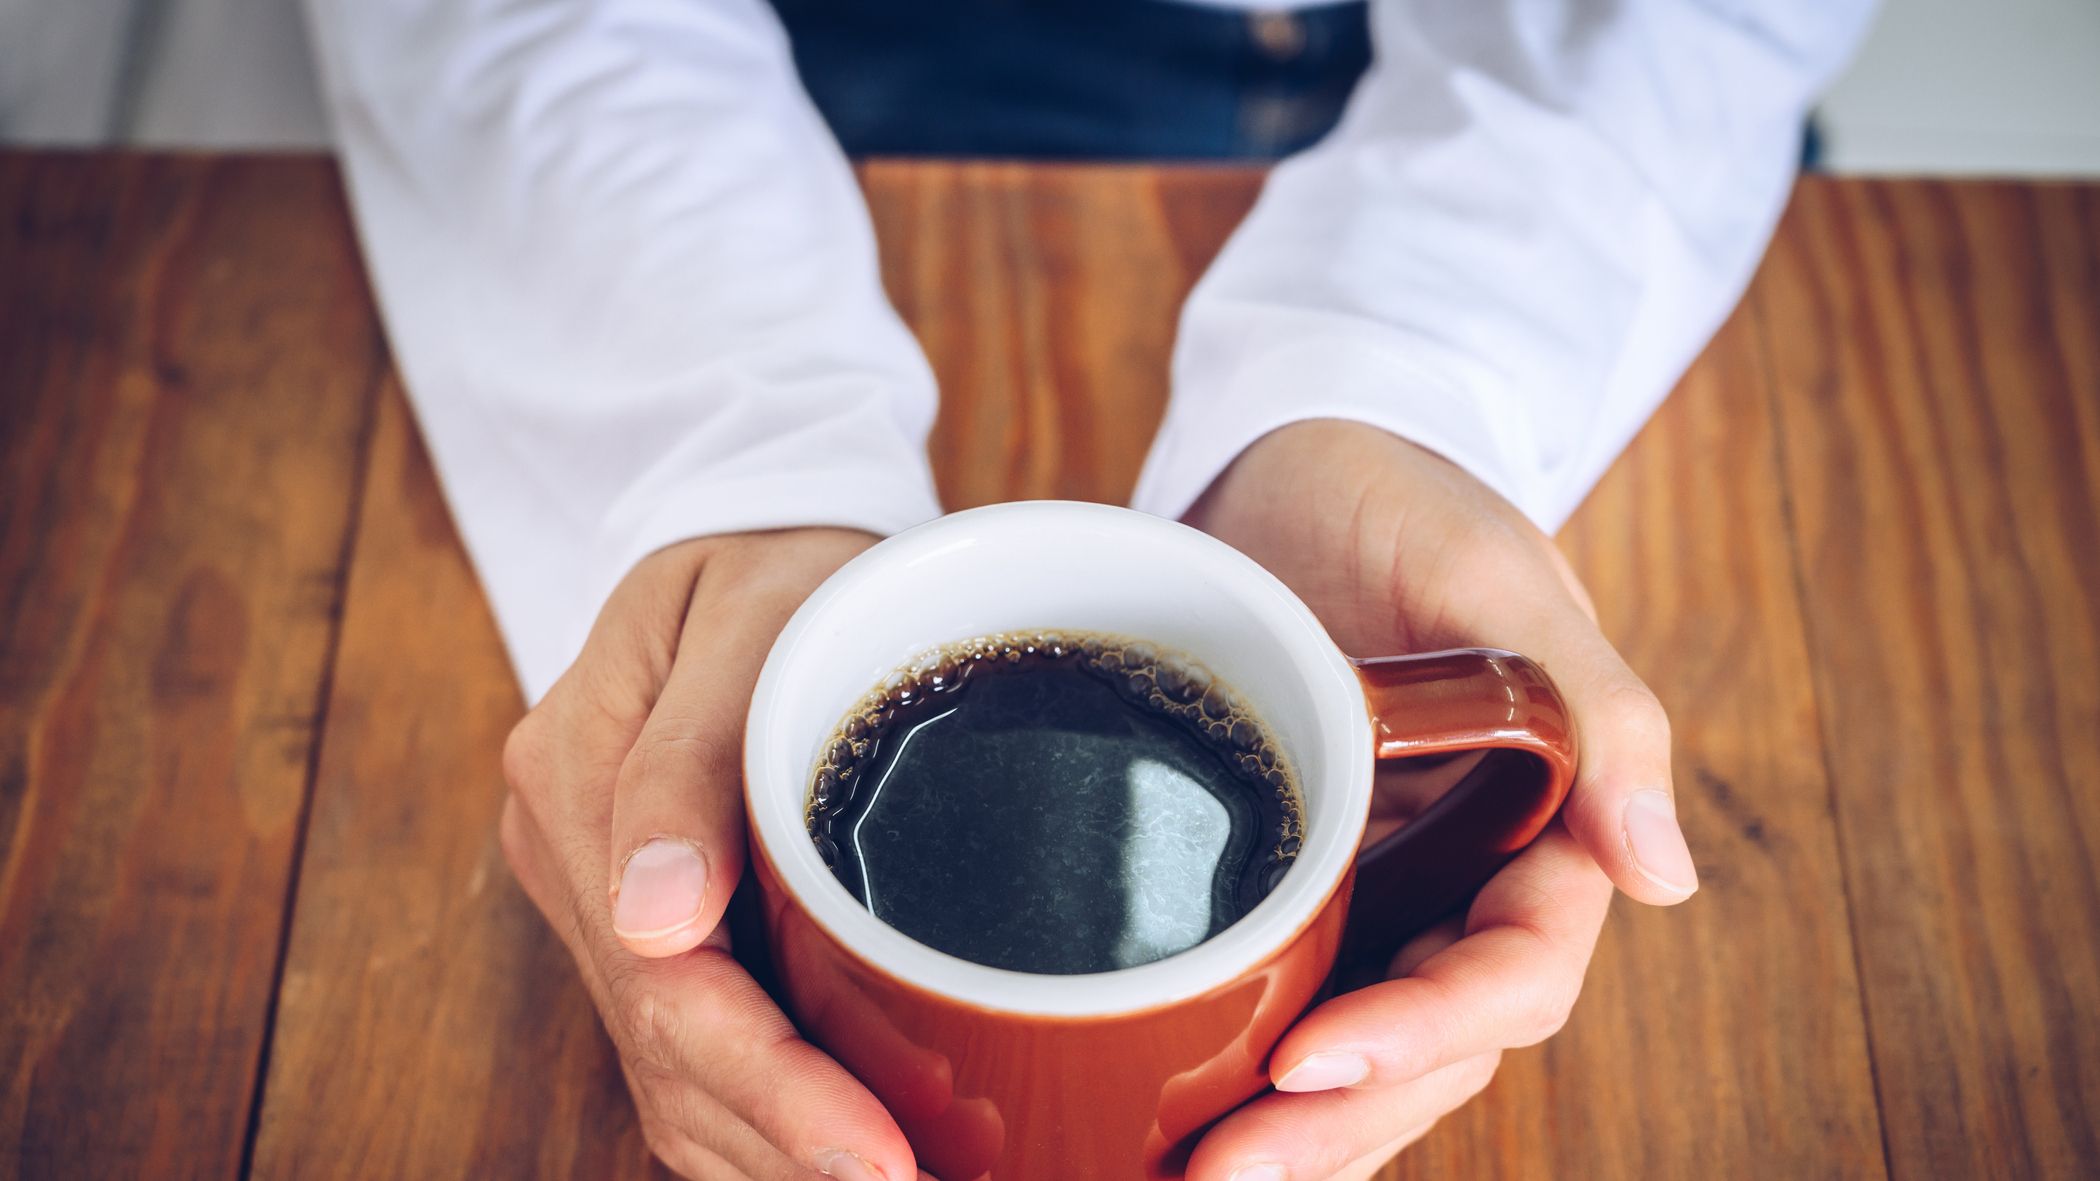 https://hips.hearstapps.com/hmg-prod/images/someone-hands-holding-a-mug-of-black-coffee-before-royalty-free-image-1687962548.jpg?crop=1xw:0.82762xh;center,top